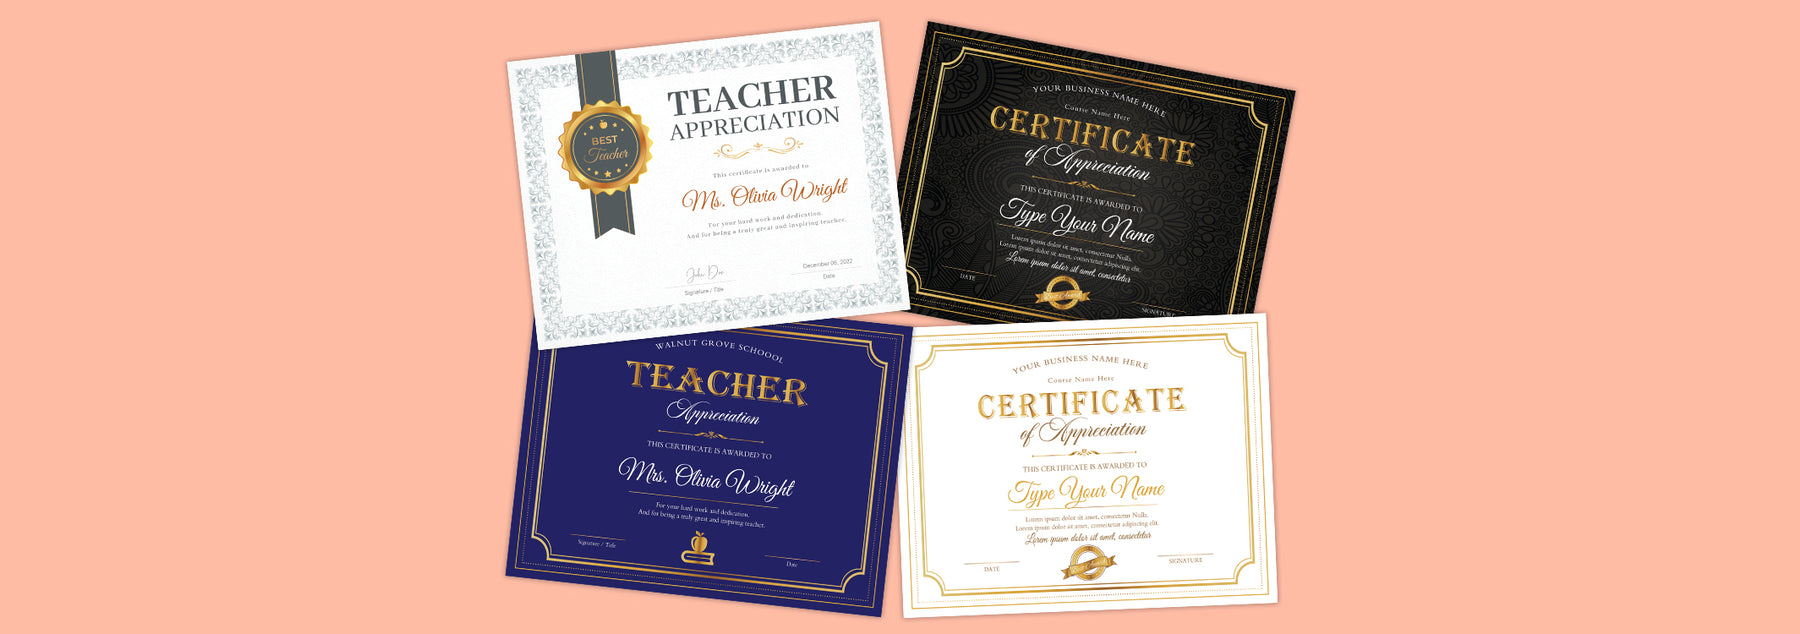 Certificate of Appreciation Wording: How to Make It Meaningful and Memorable